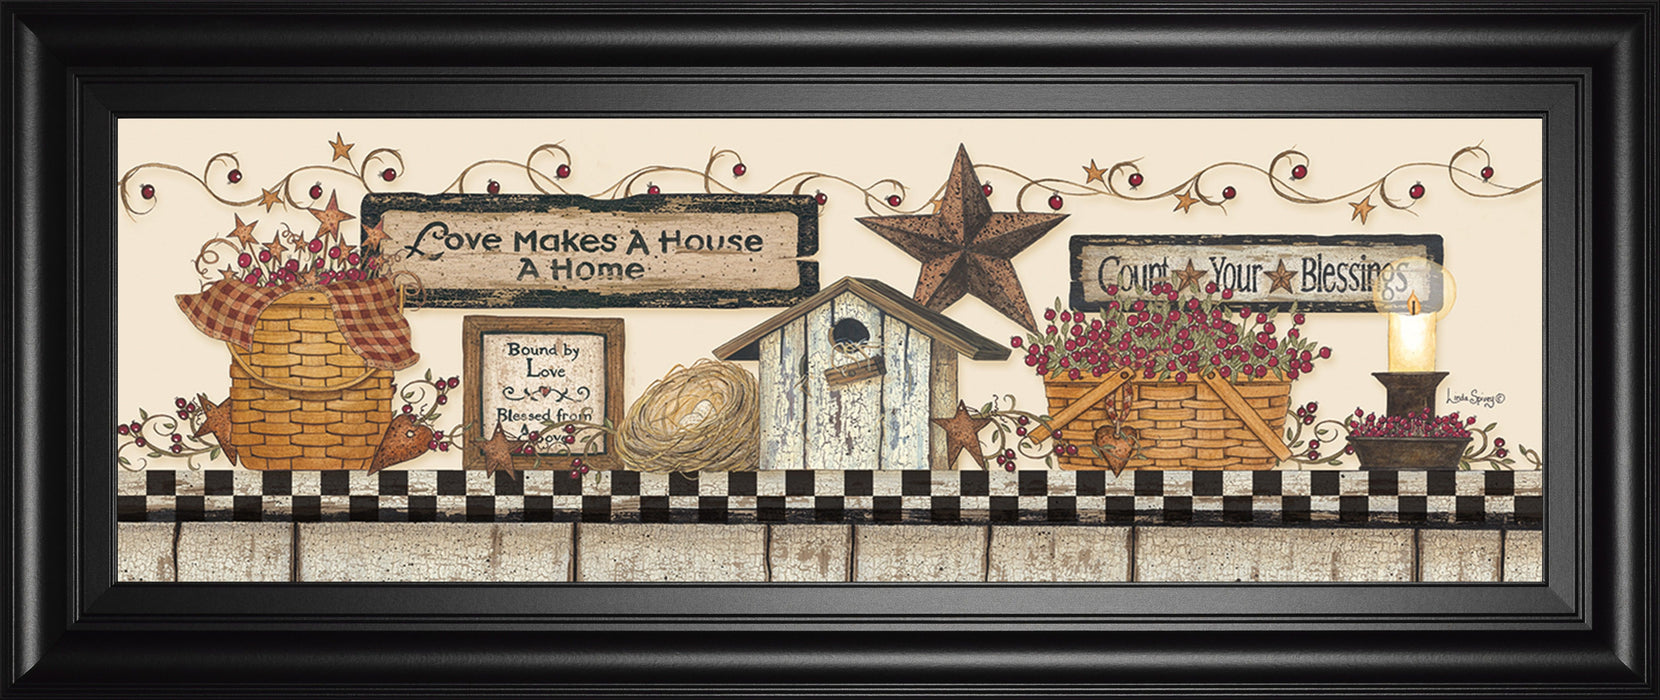 Love Makes A House A Home By Linda Spivey - Framed Print Wall Art - Beige